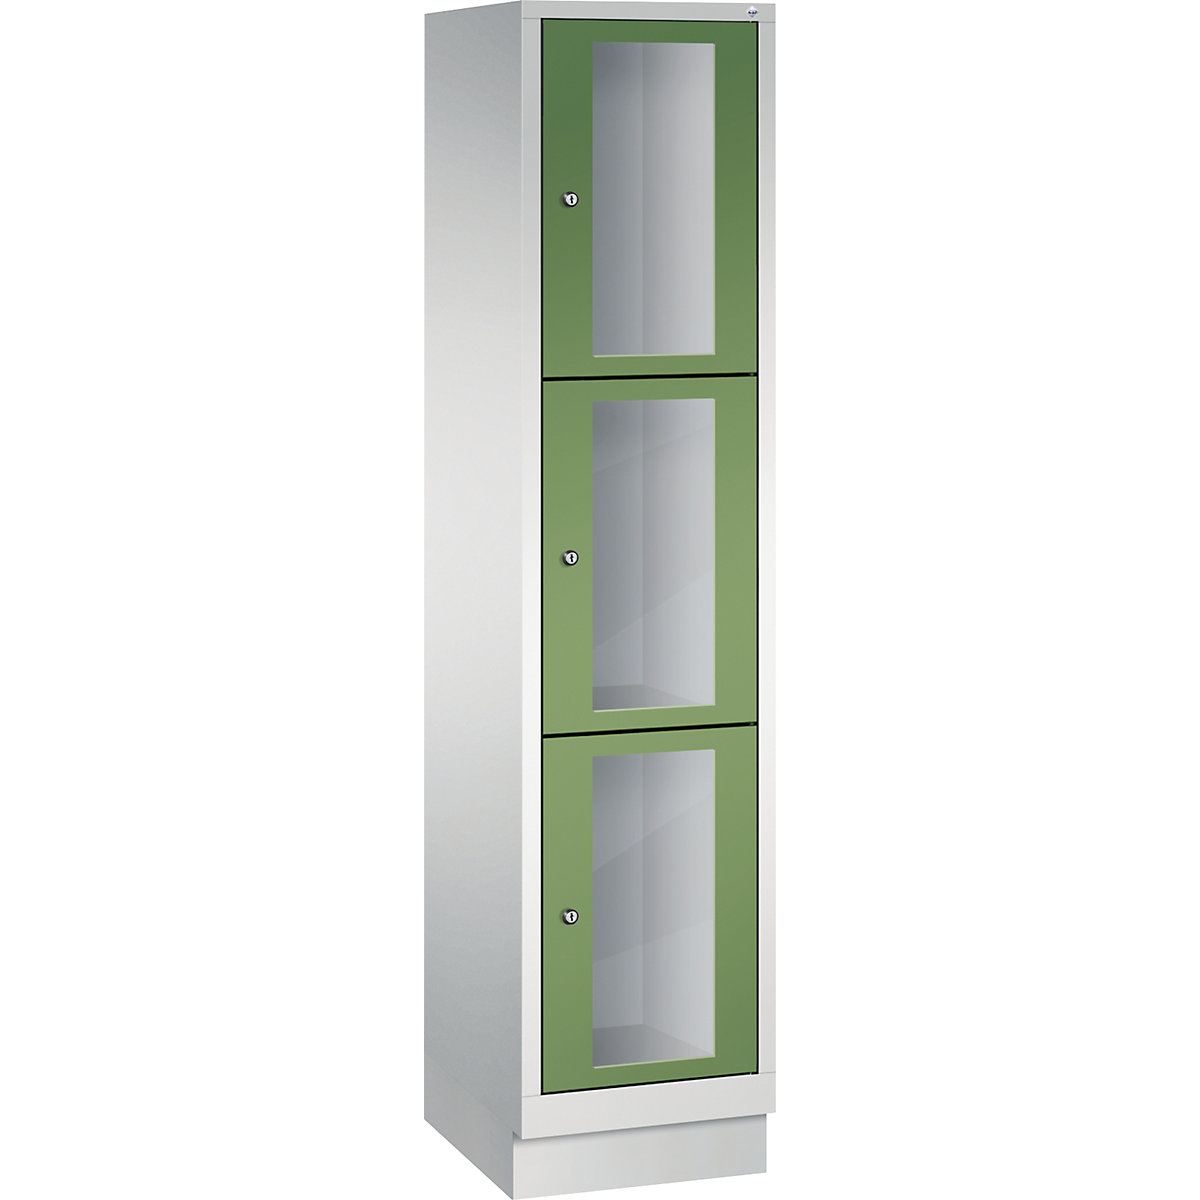 C+P – CLASSIC locker unit, compartment height 510 mm, with plinth, 3 compartments, width 420 mm, reseda green door